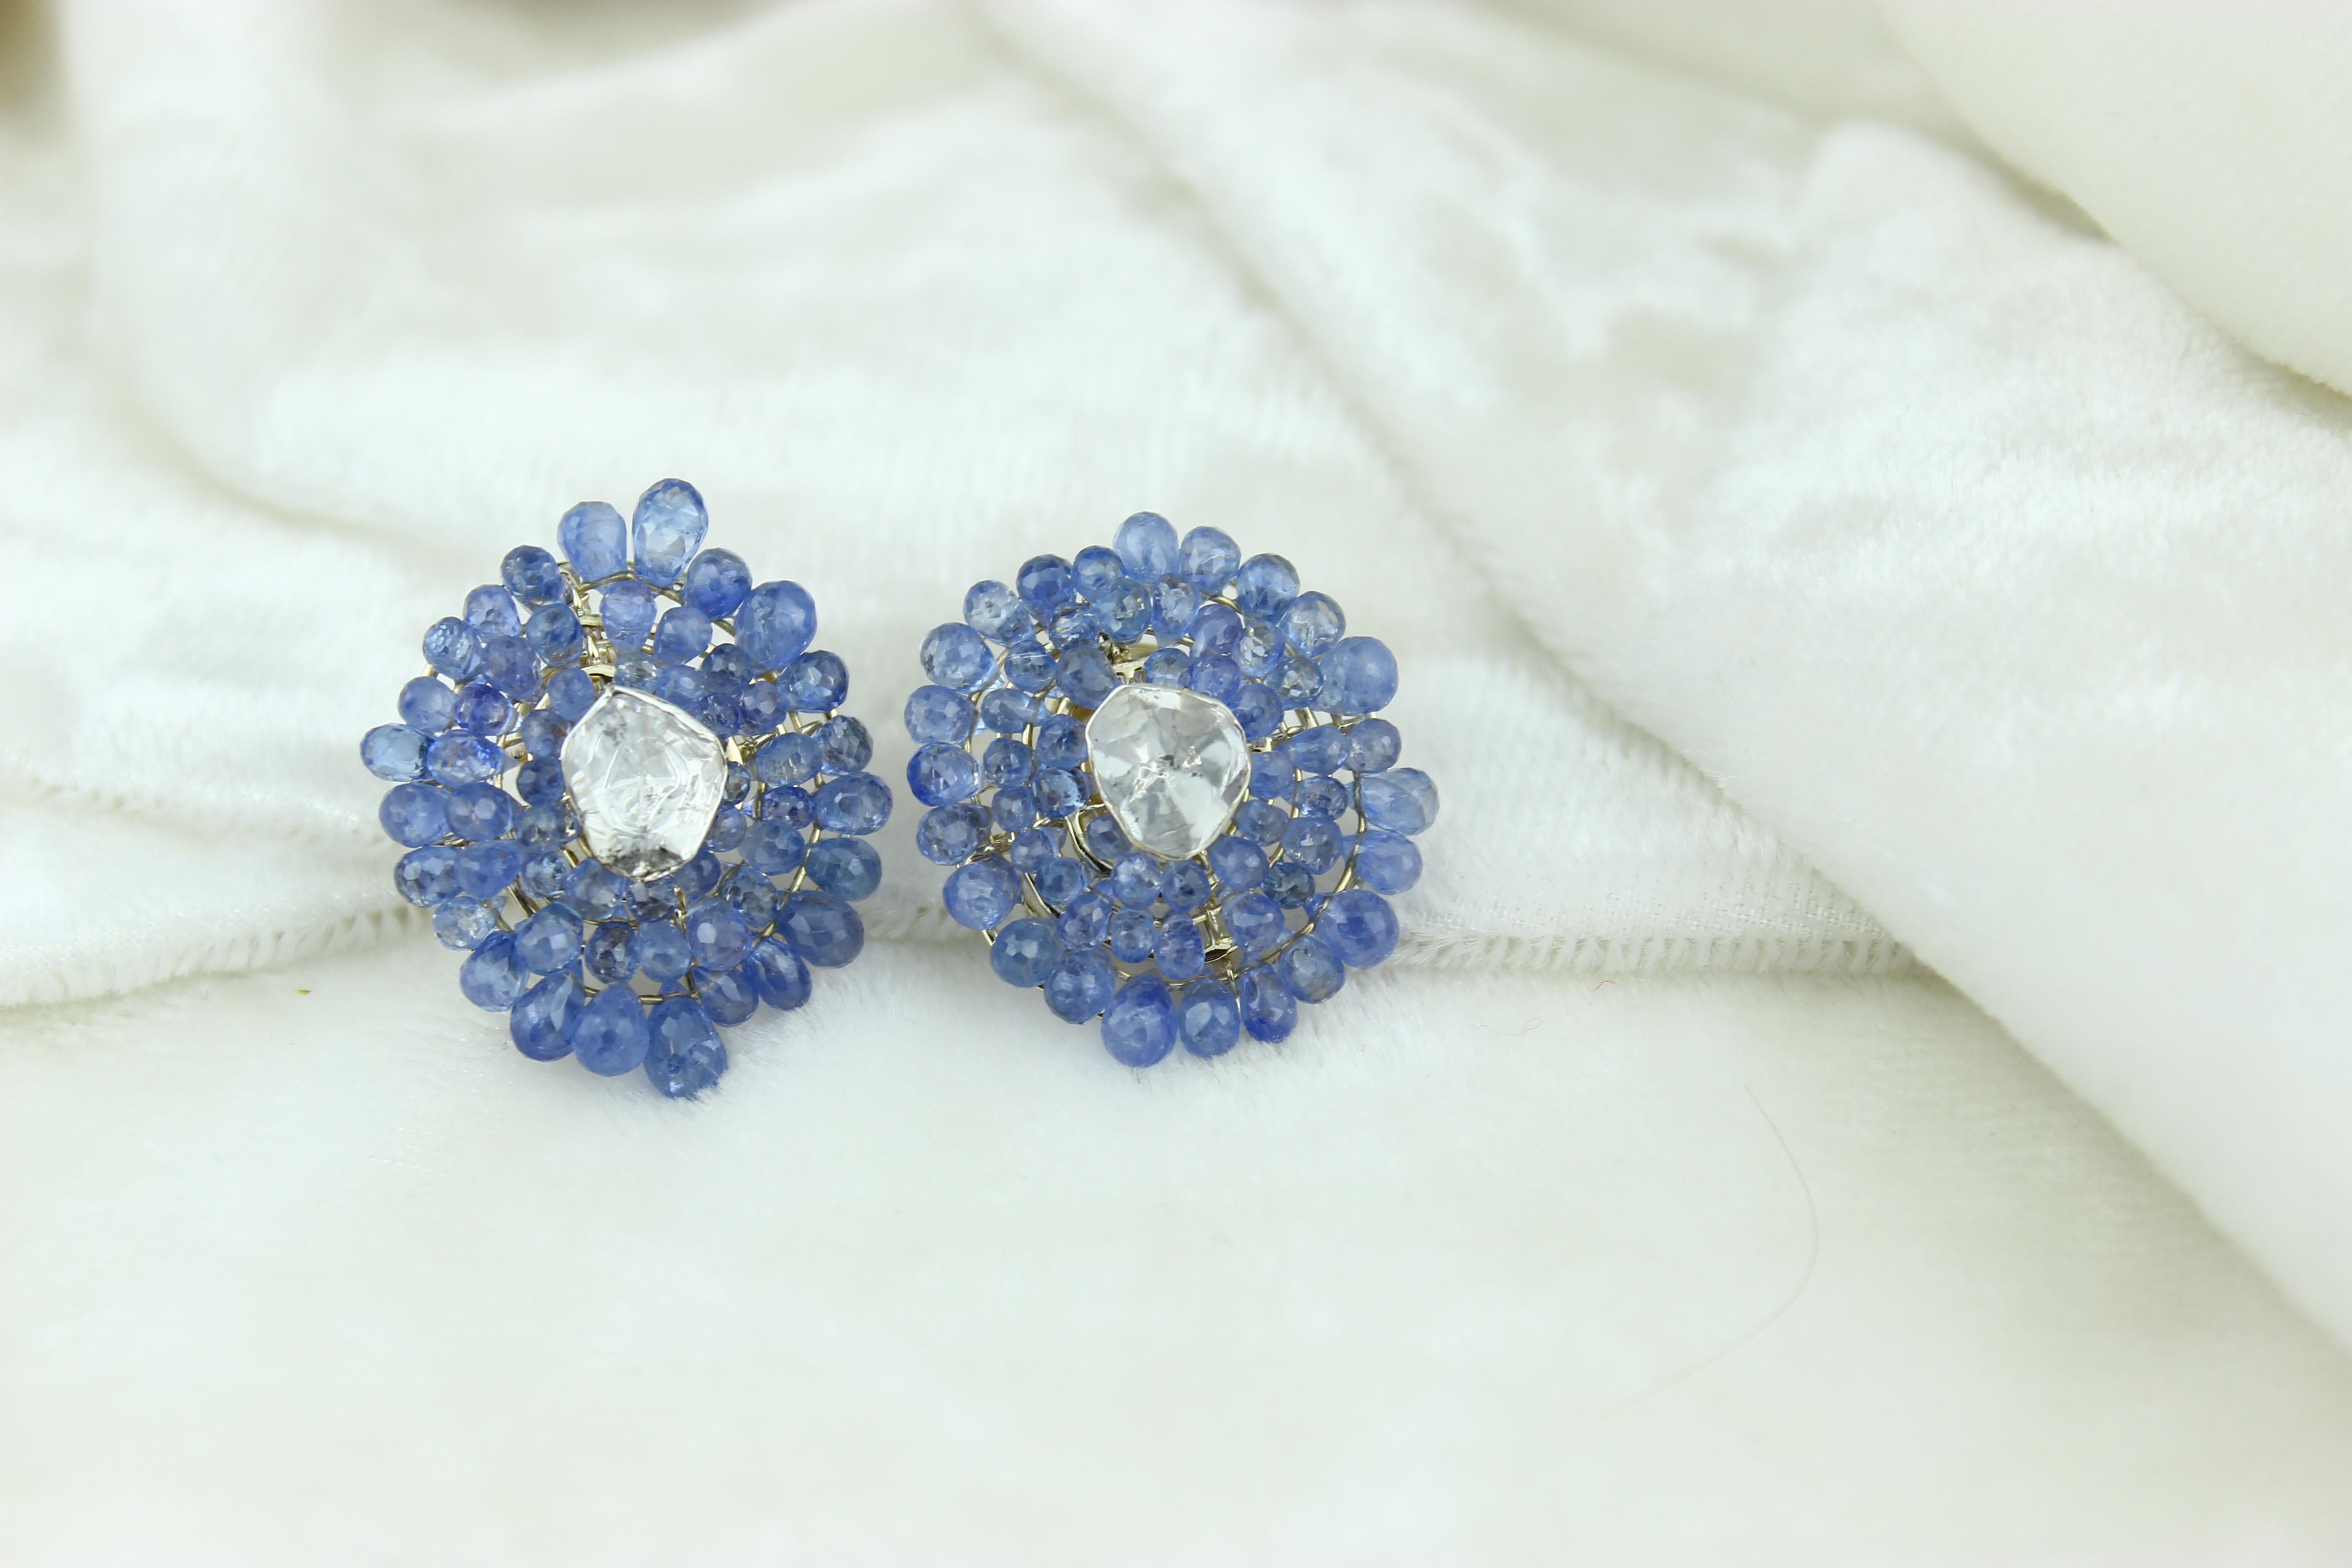 Captivating floral stud earrings showcasing a stunning combination of a polki at the center surrounded by blue briollete gemstones. Crafted with precision in 18k solid gold, these earrings radiate opulence and charm. The floral design adds a